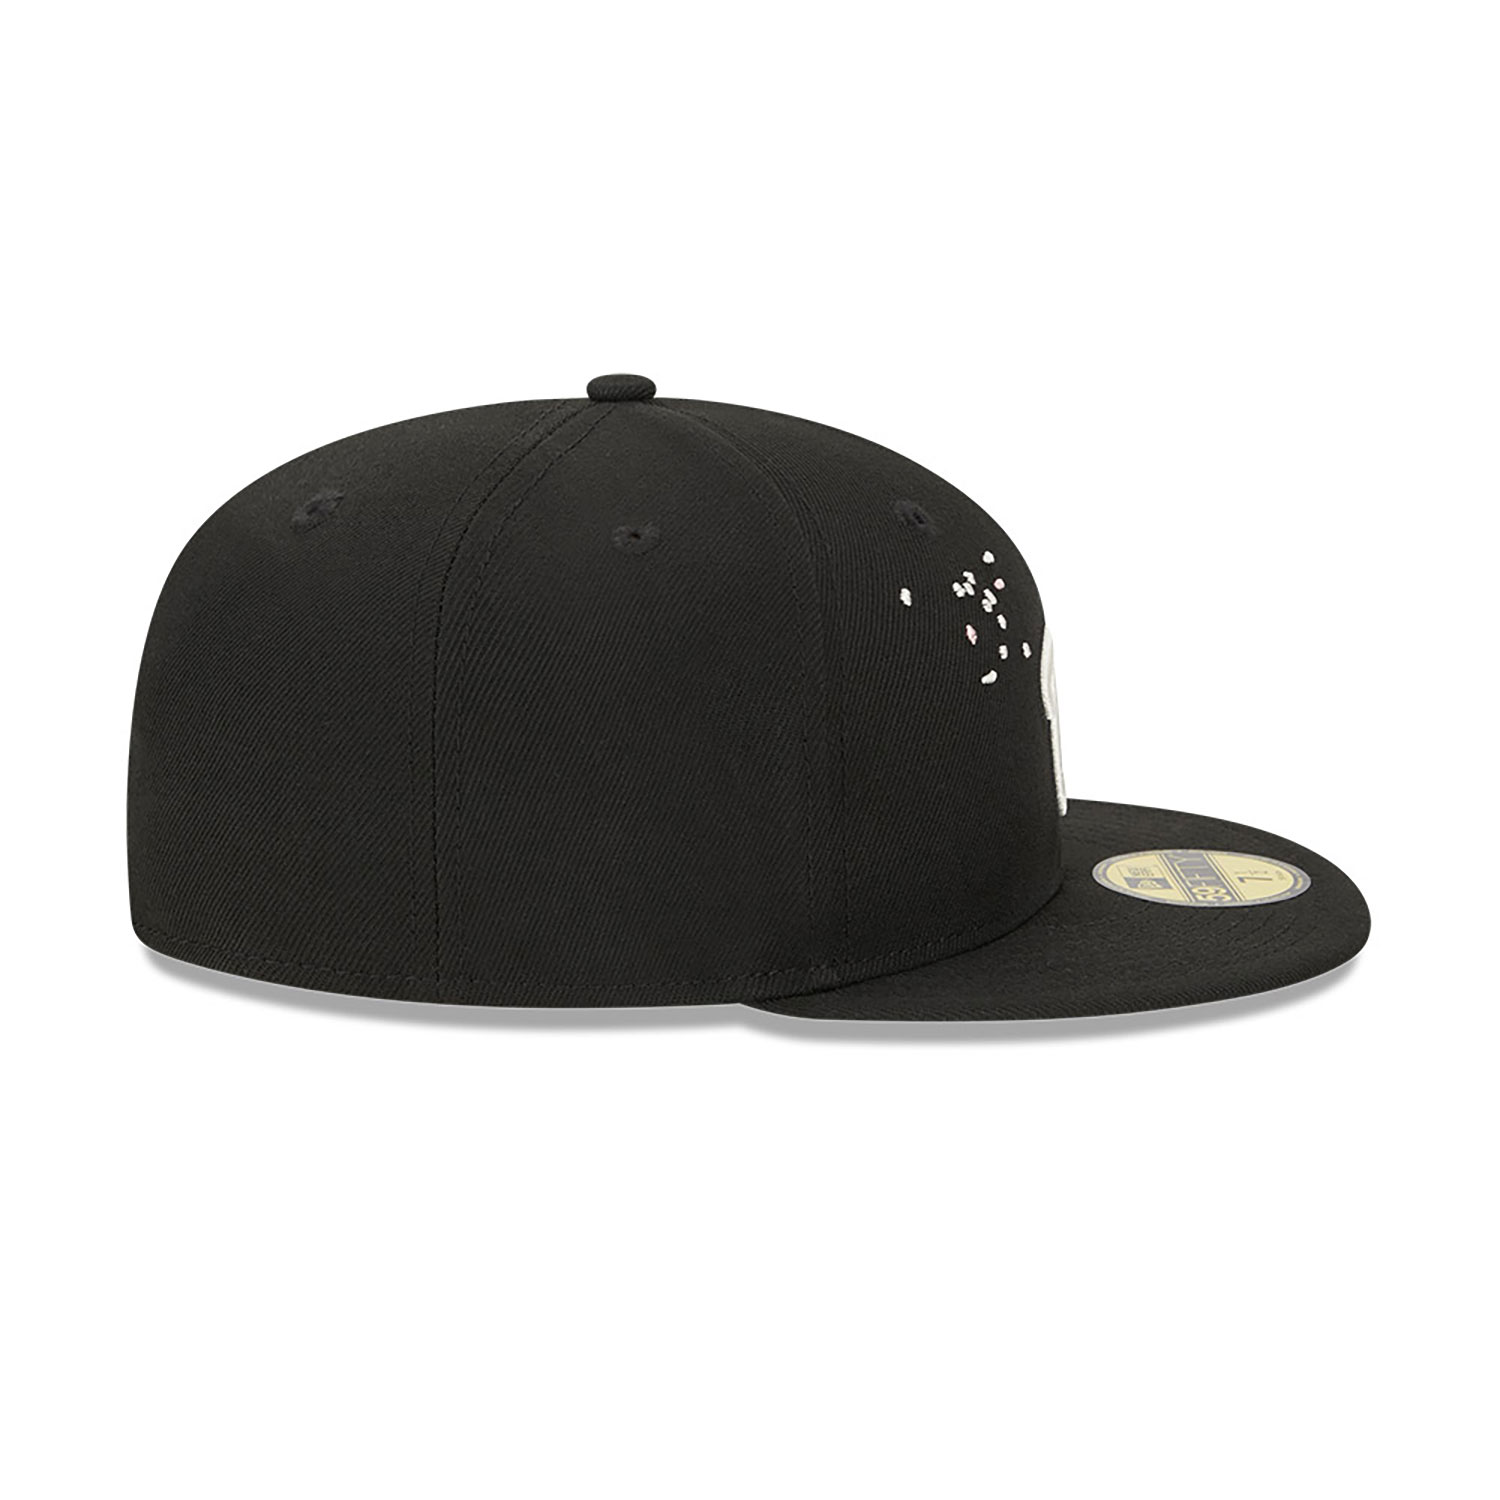 Washington Nationals Cherry Blossom Black 59FIFTY Fitted Cap